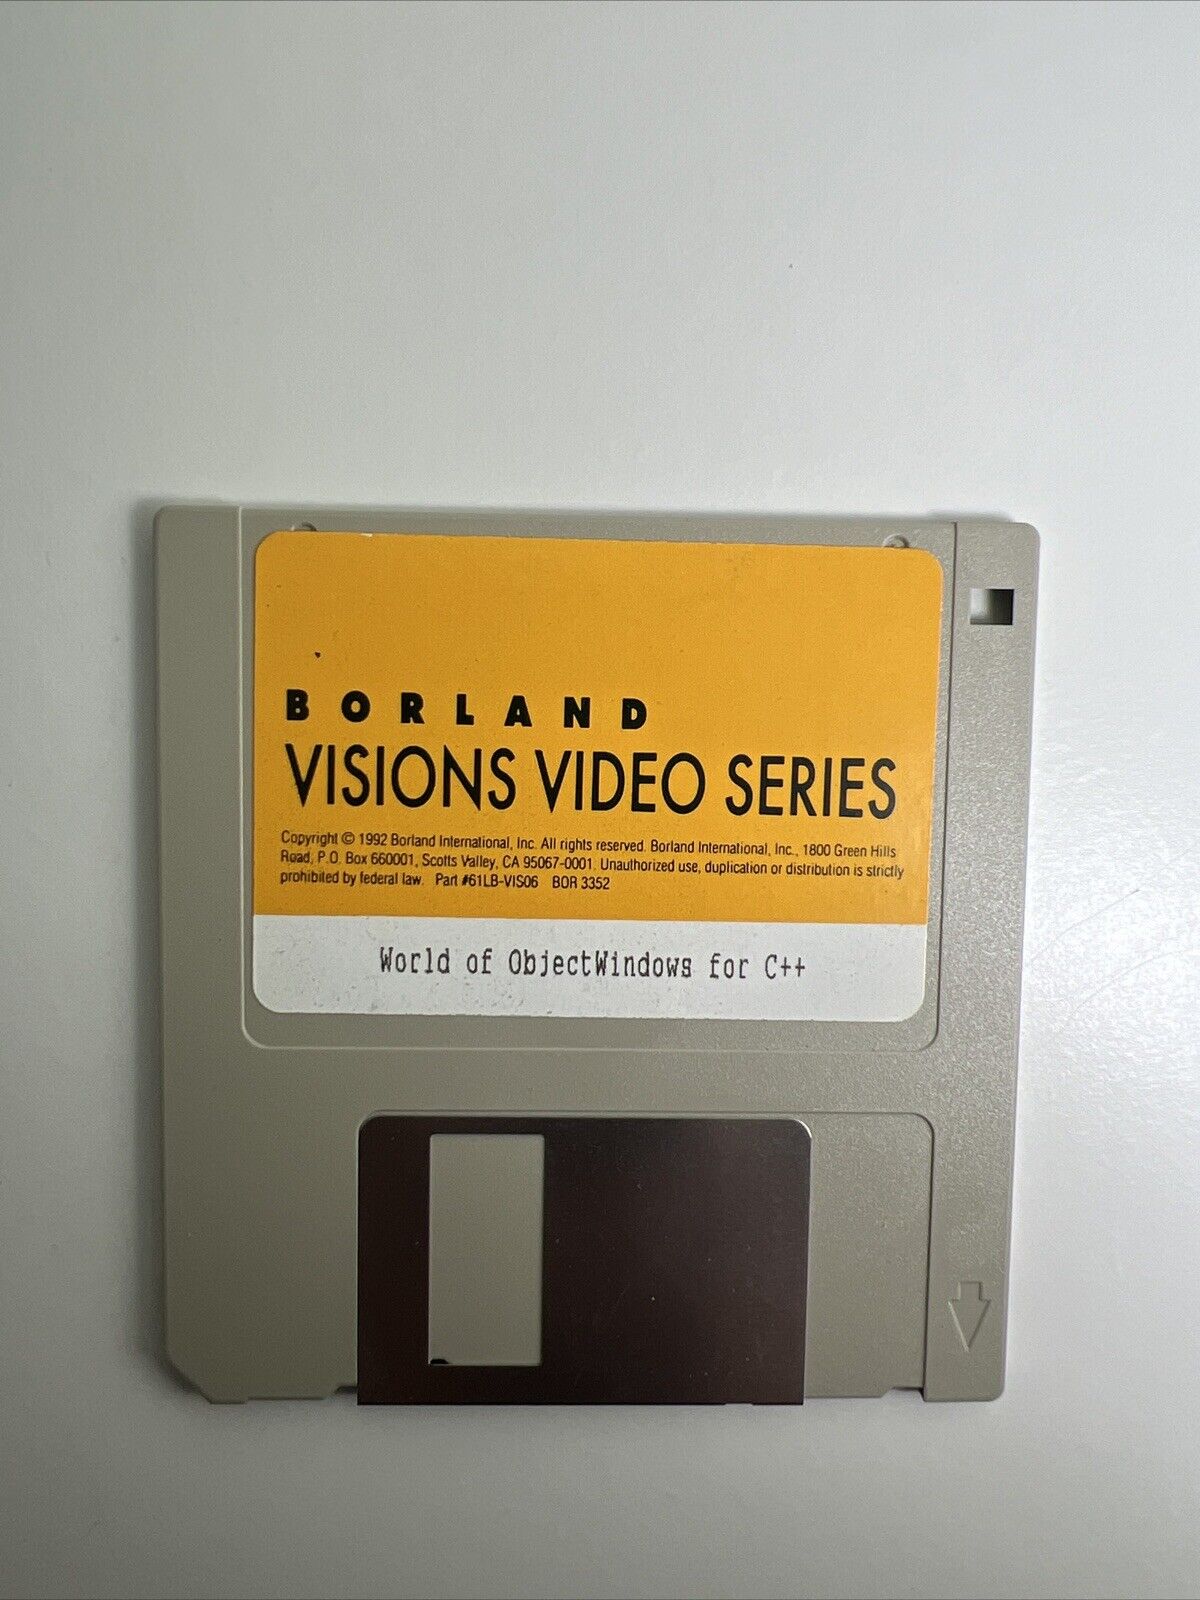 BORLANDVISIONS VIDEO SERIES, World of ObjectWindows for C++, Floppy 3.5,Vintage